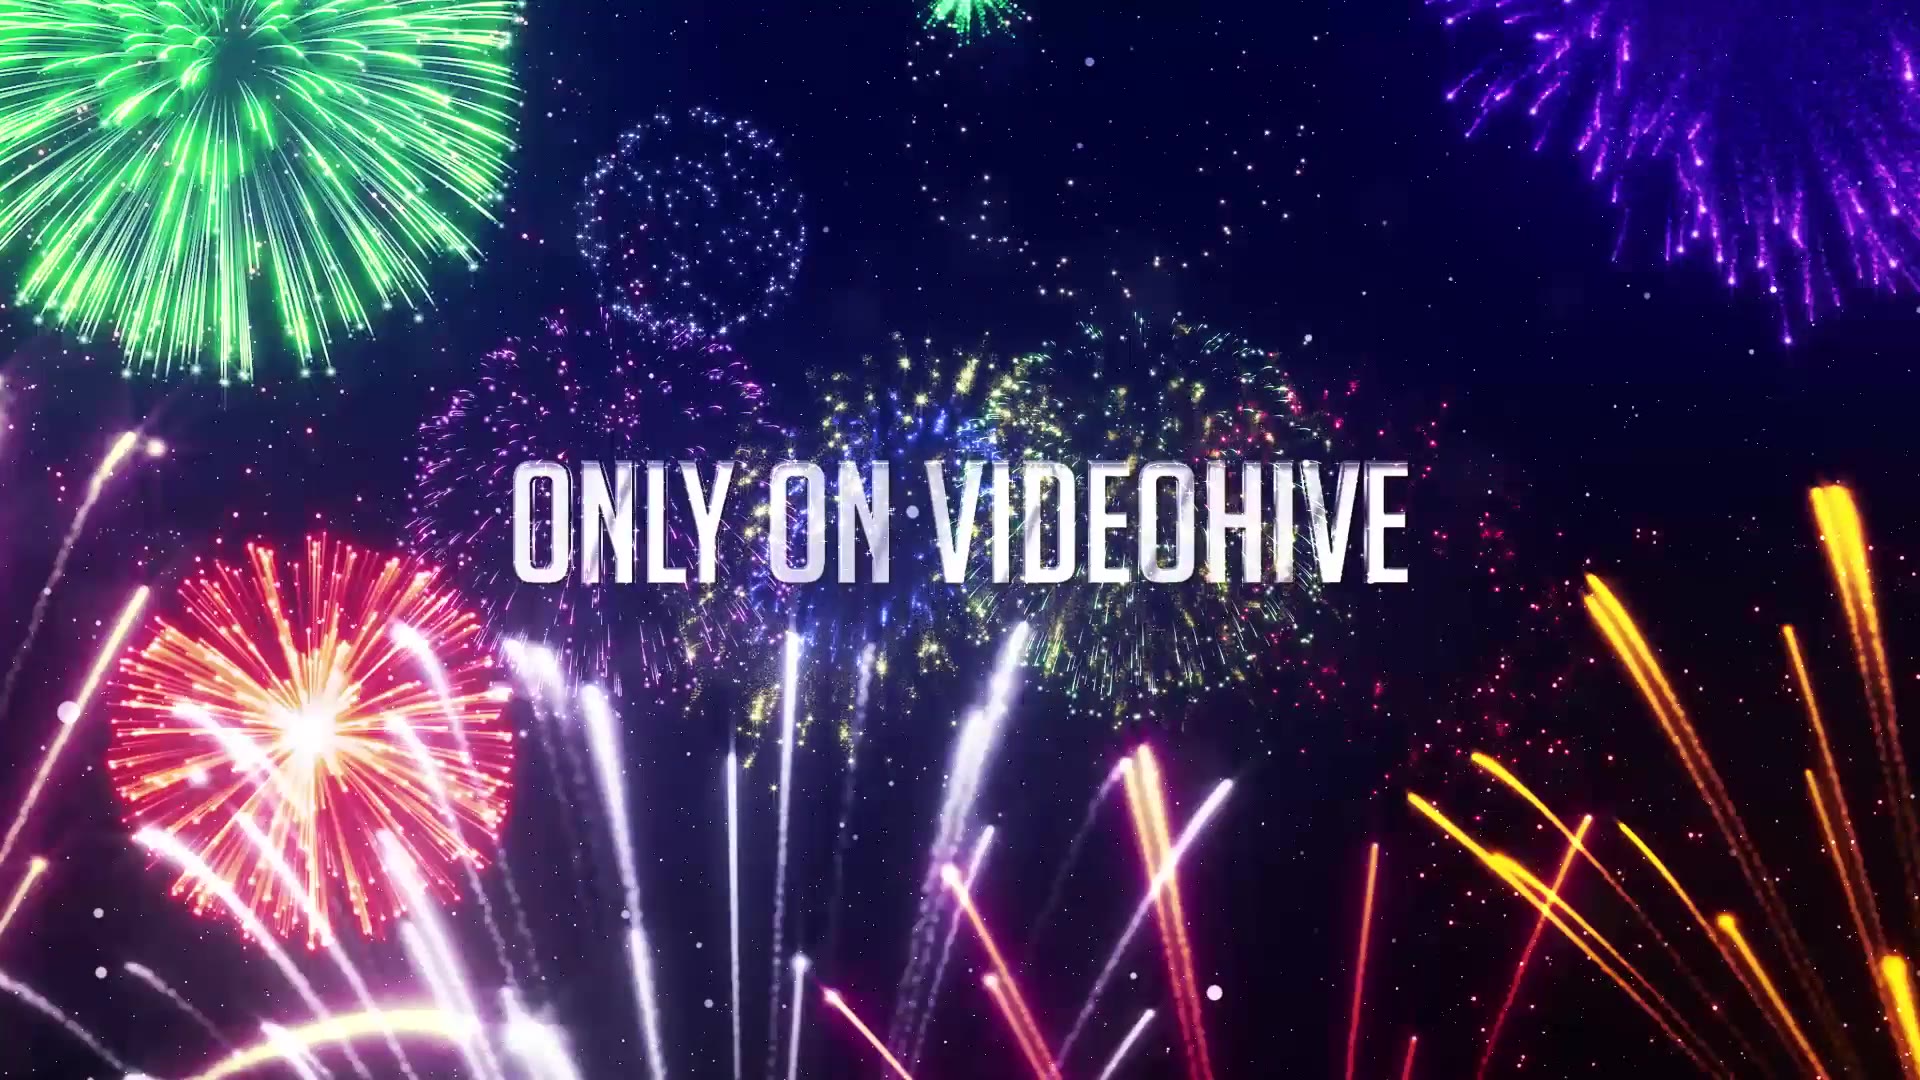 Fireworks Titles Videohive 24750446 Download Fast After Effects